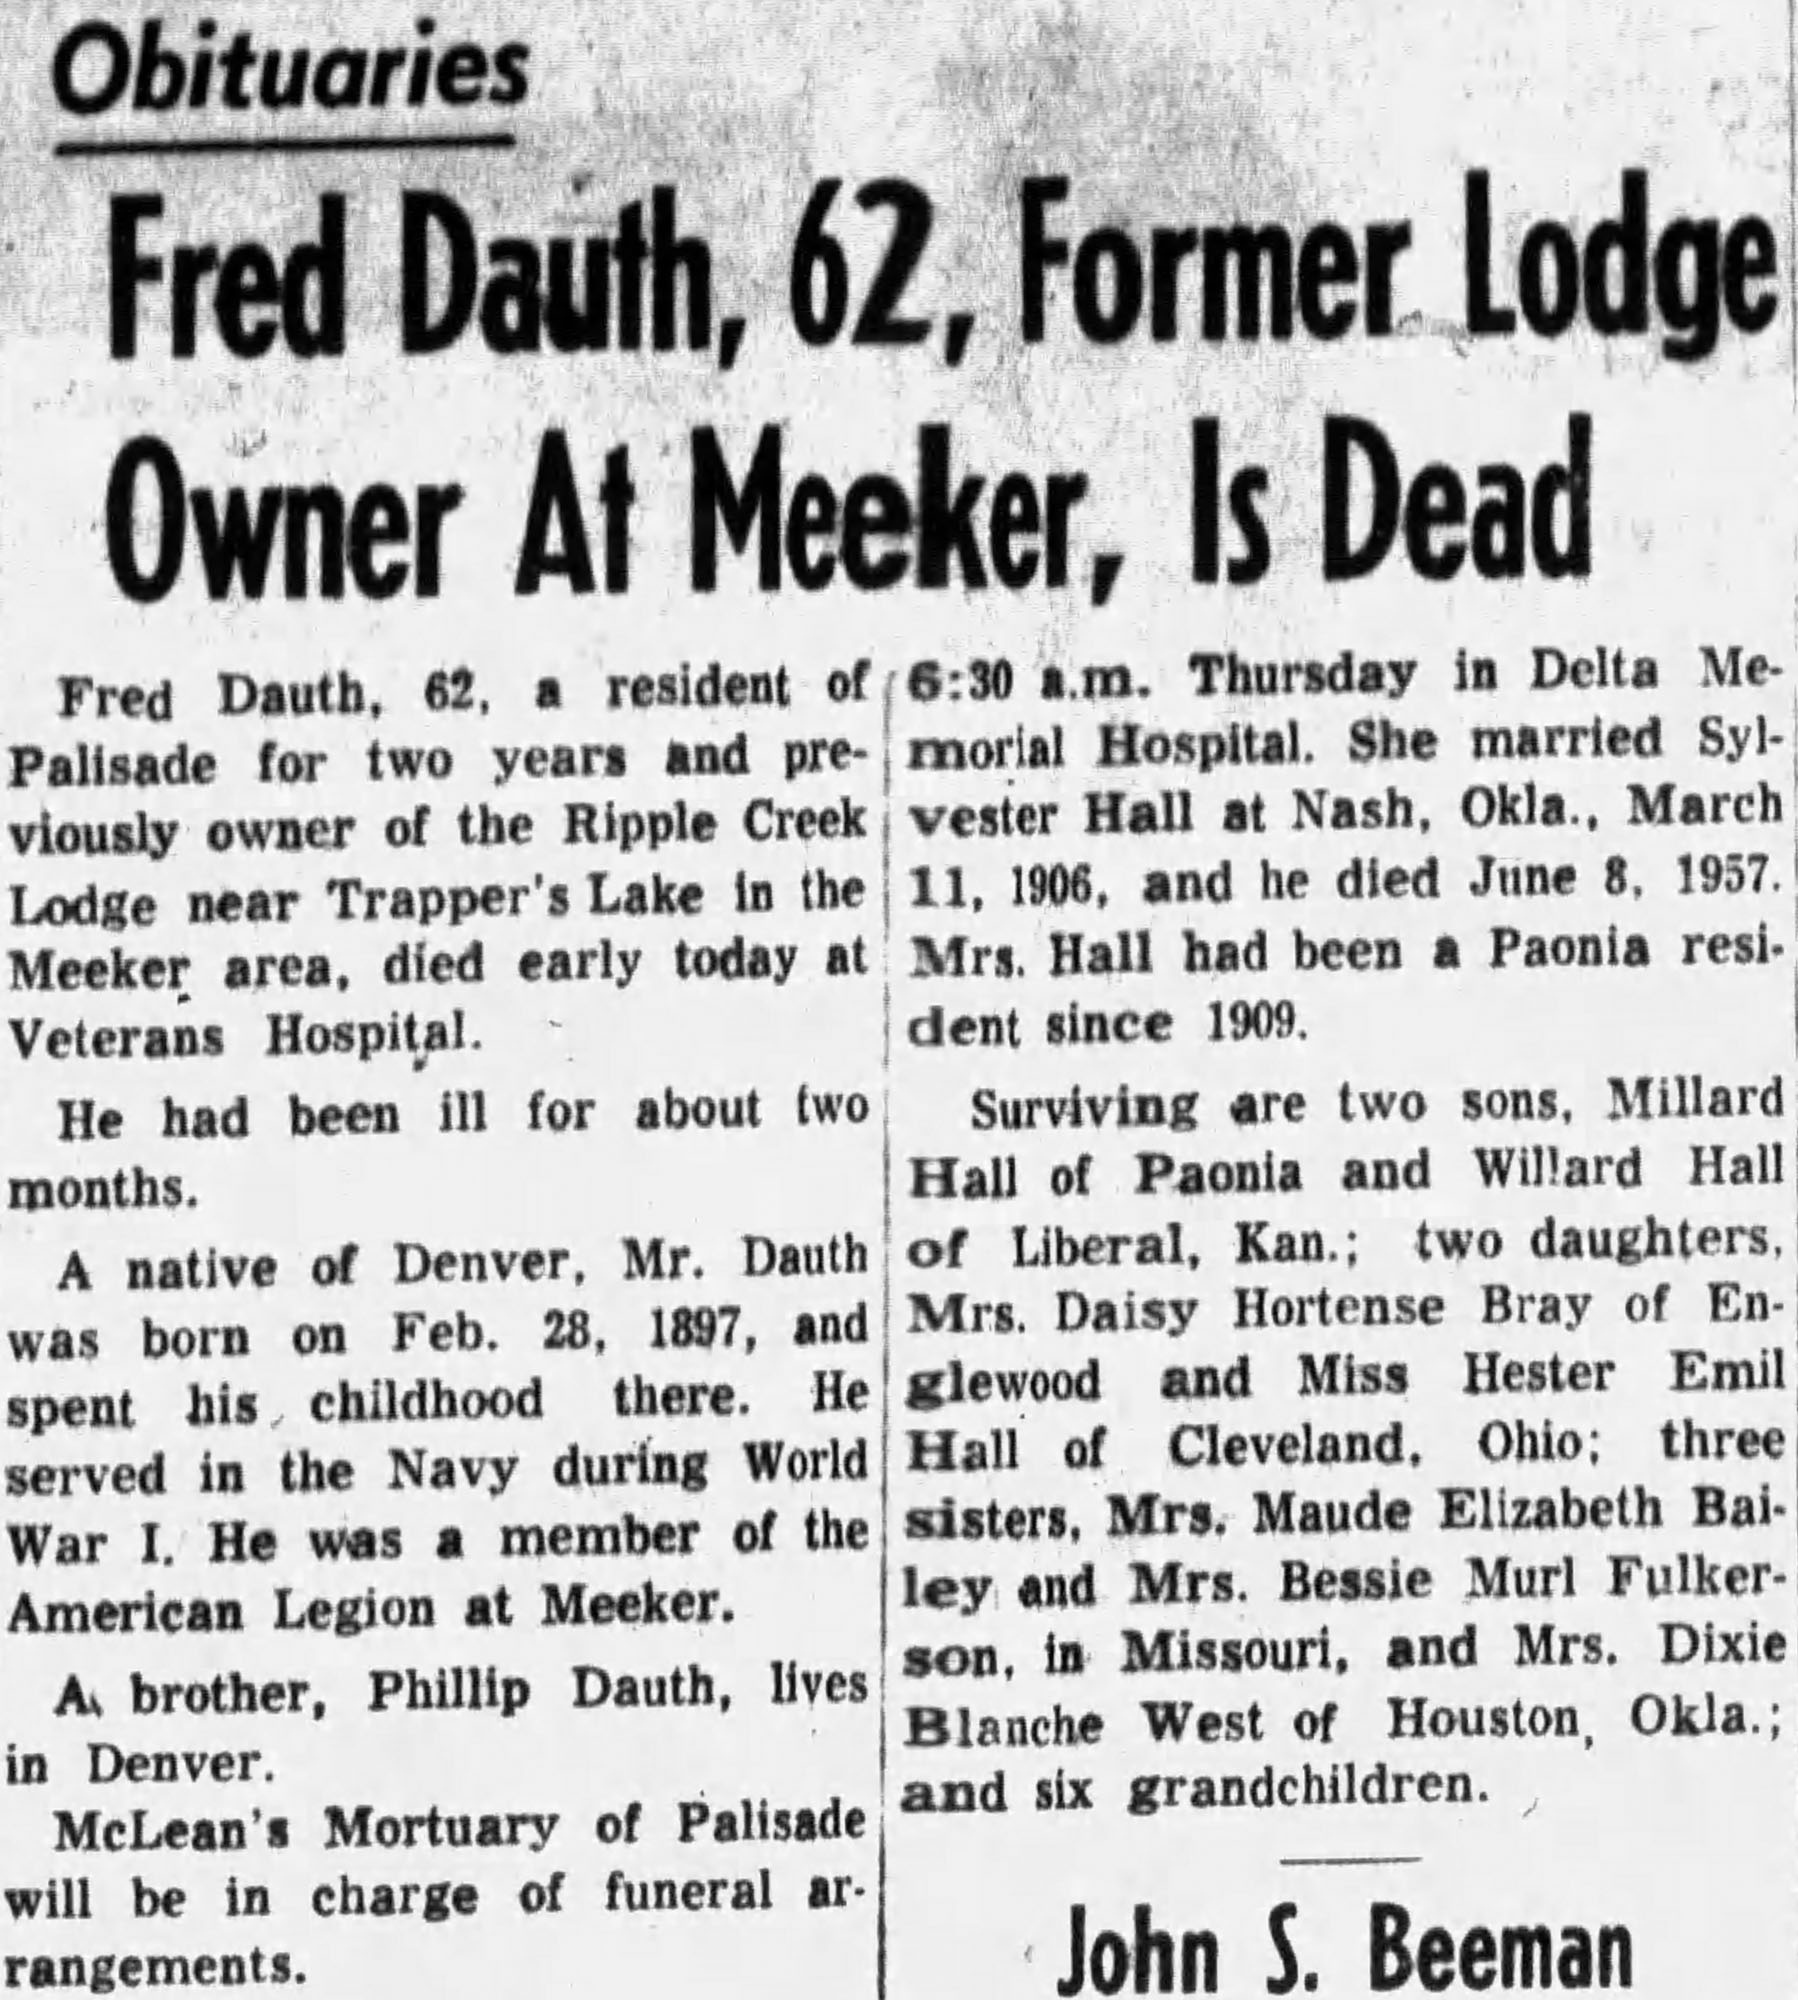 Dauth Family Archive - 1959-11-20 - The Daily Sentinel - Fred Dauth Obituary